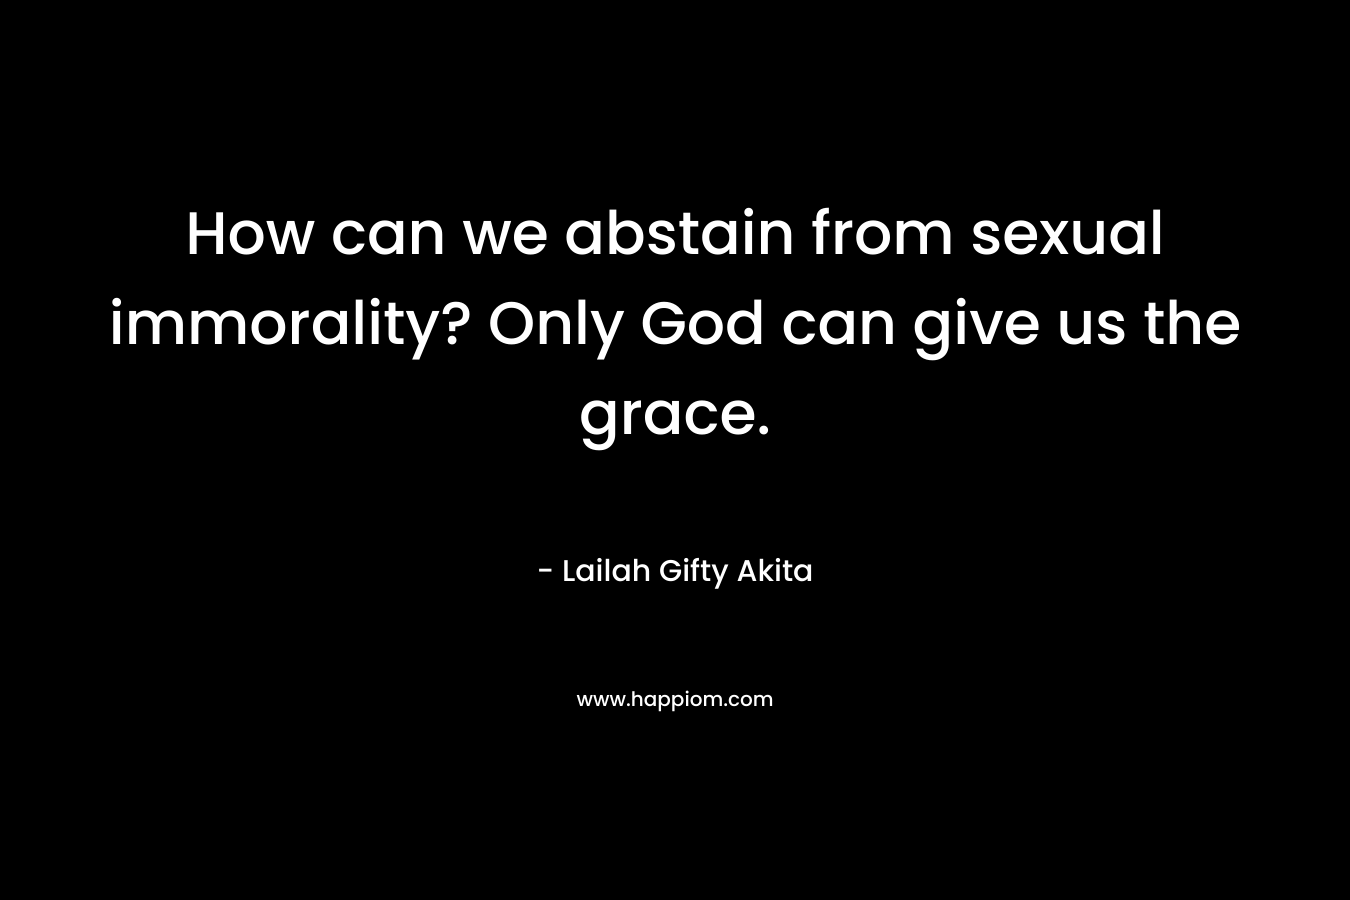 How can we abstain from sexual immorality? Only God can give us the grace. – Lailah Gifty Akita